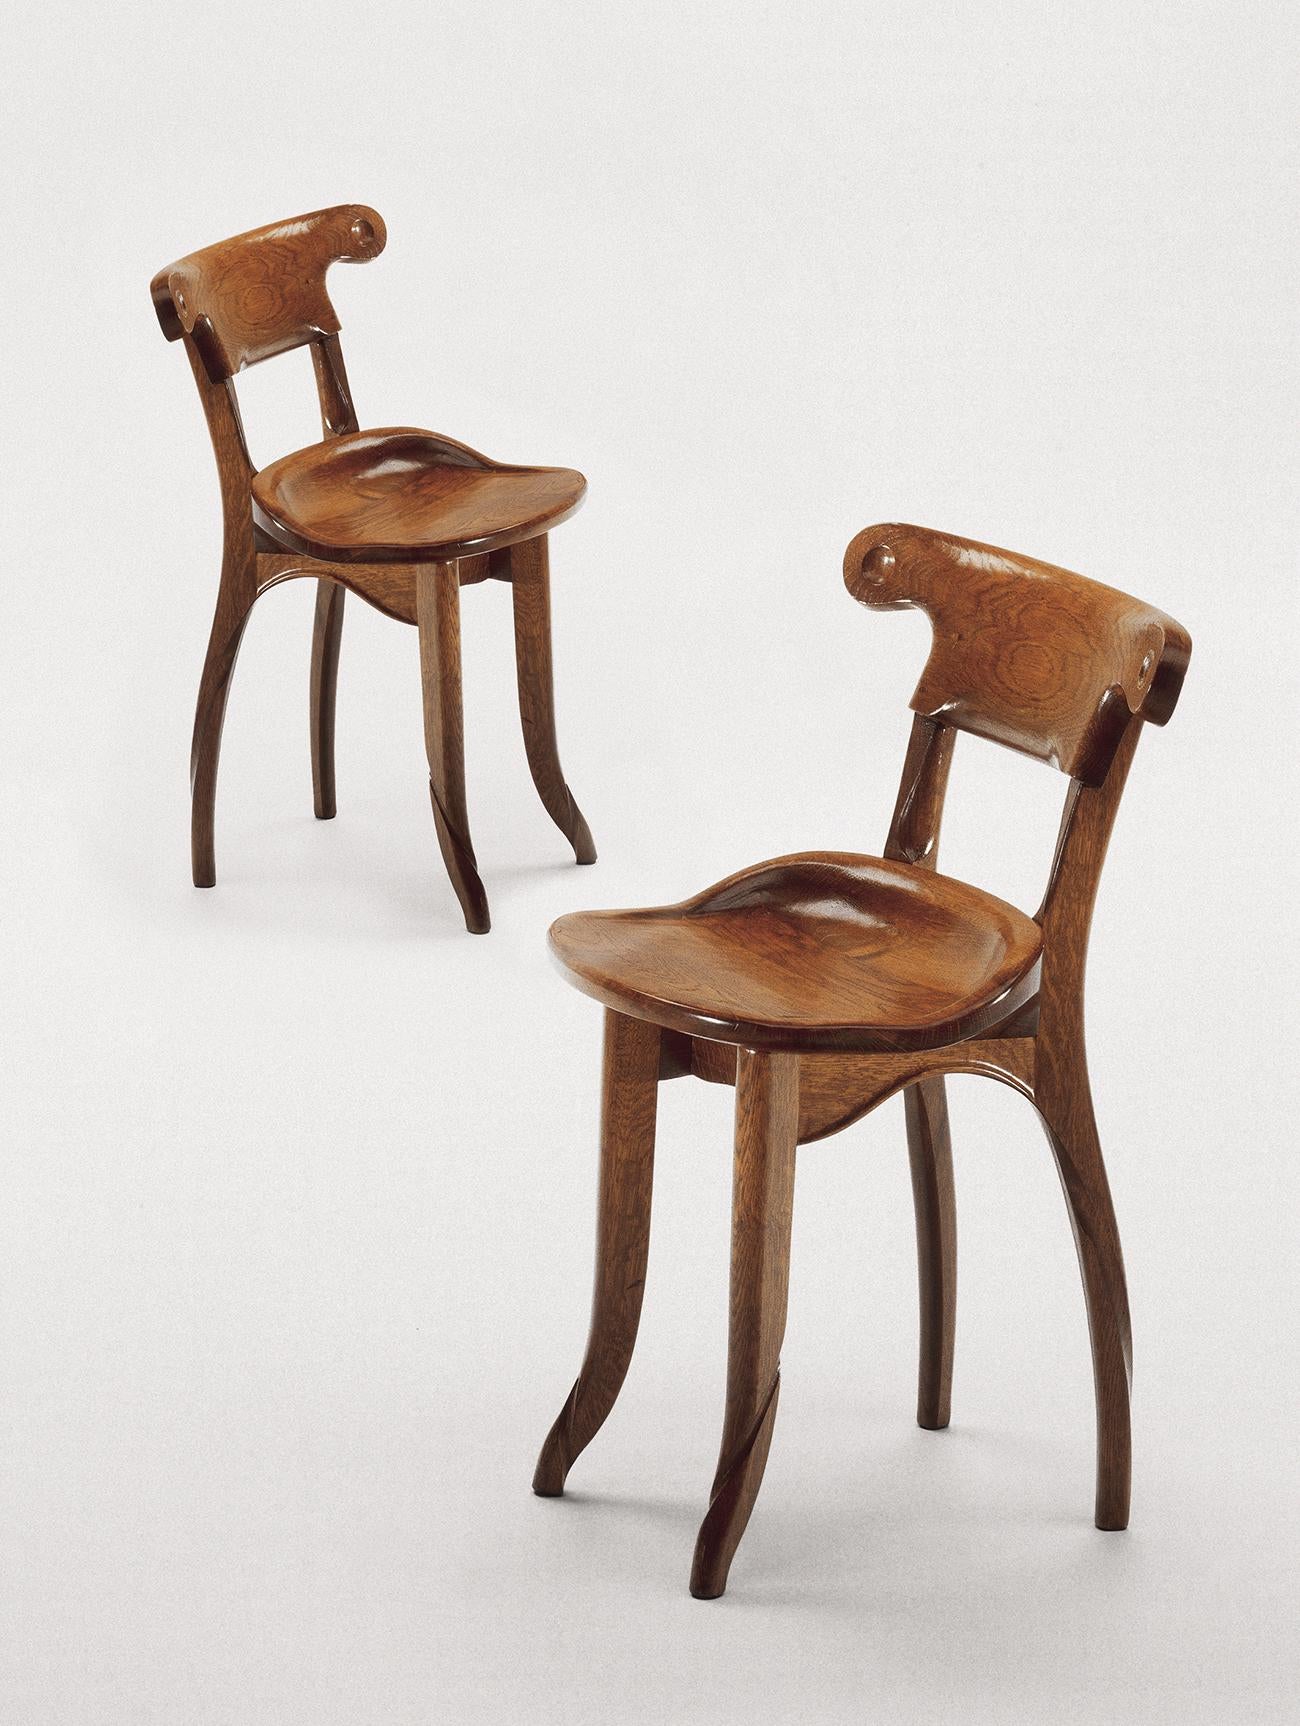 Batllo chair by Antonio Gaudí
1906
Dimensions: 74 x 52 x 47 cm
Materials: Dark varnished oak

Solid dark varnished oak

Antoni Gaudí (1852/1926) is, without doubt, the most internationally well-known Spanish architect. But is not only his buildings